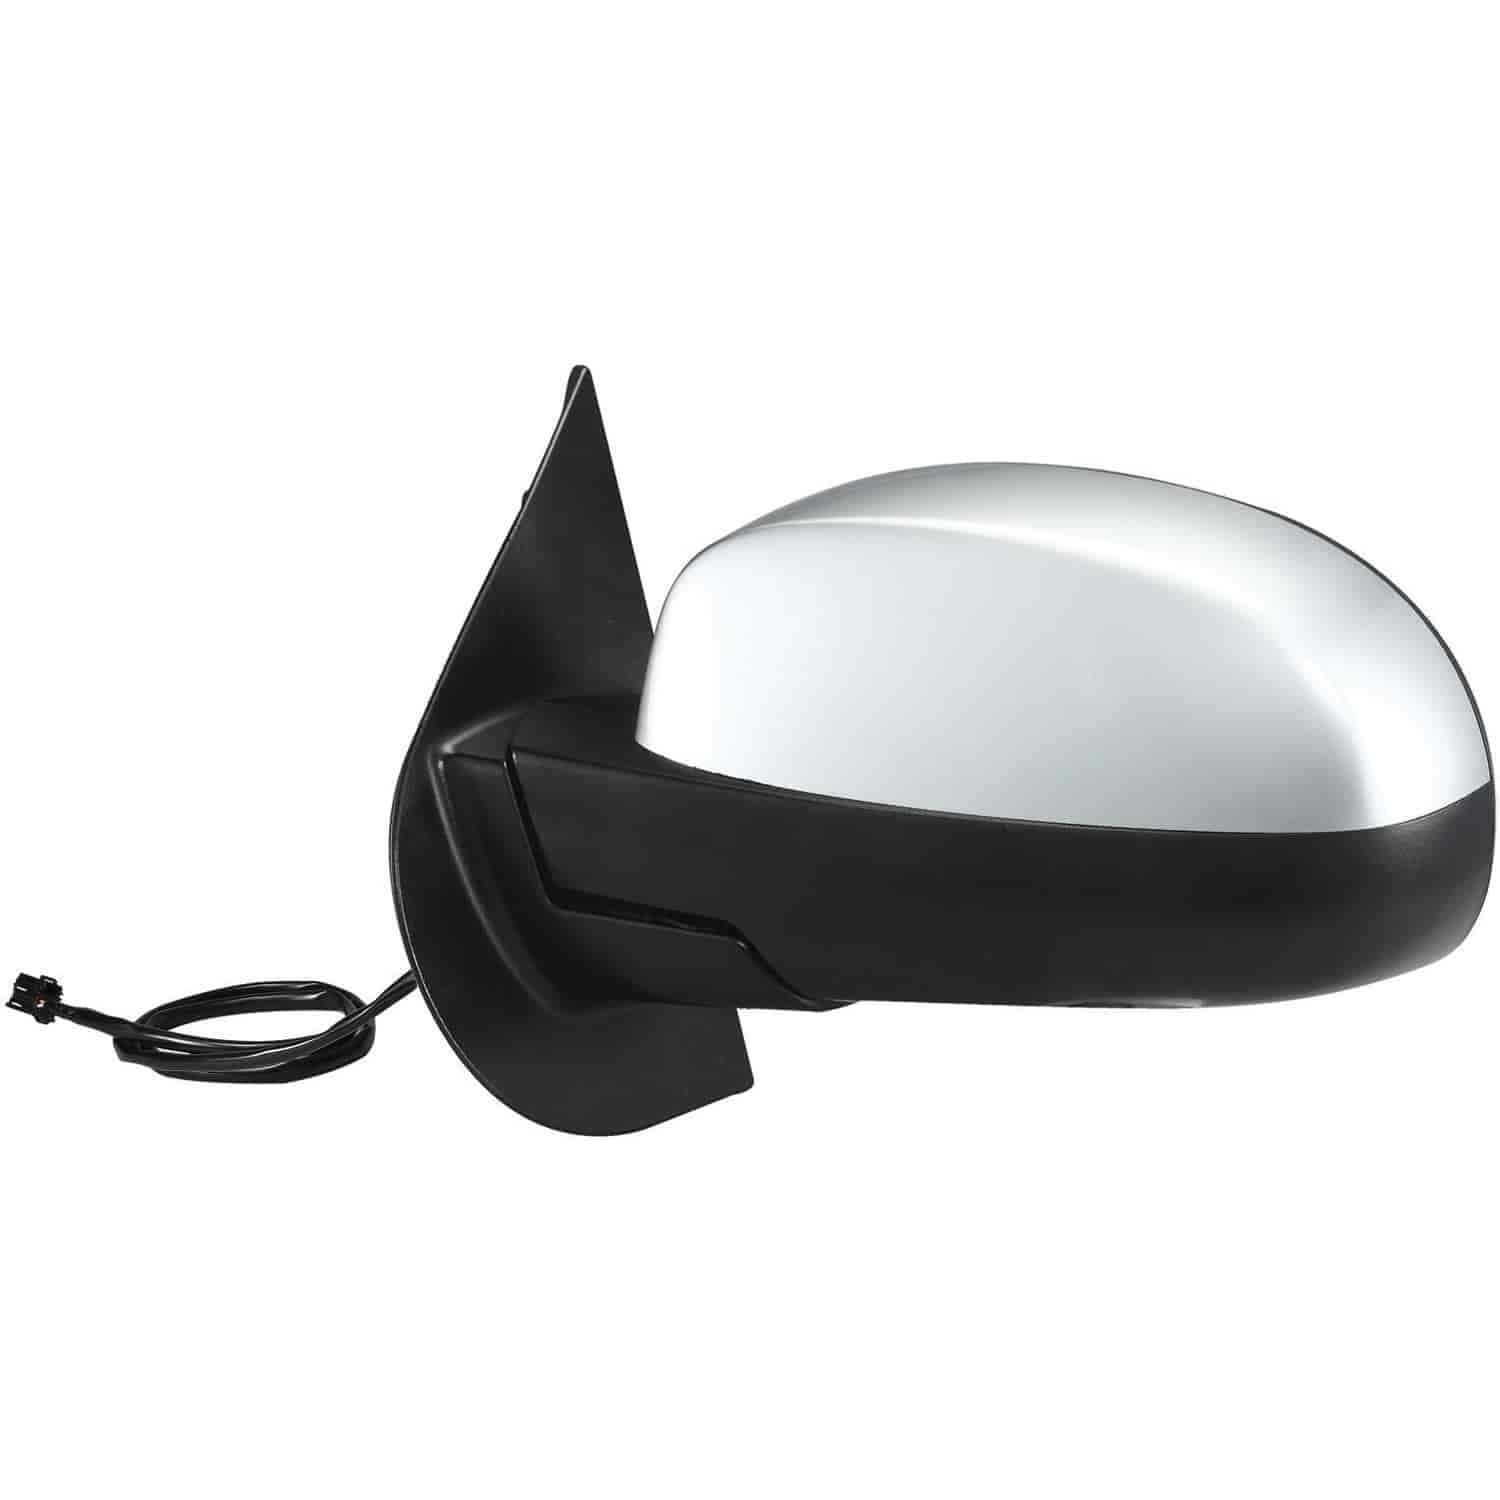 OEM Style Replacement mirror for Repl OEM Style Mirror for 07-13 Avalanche Silver/ Sierra 150007-14